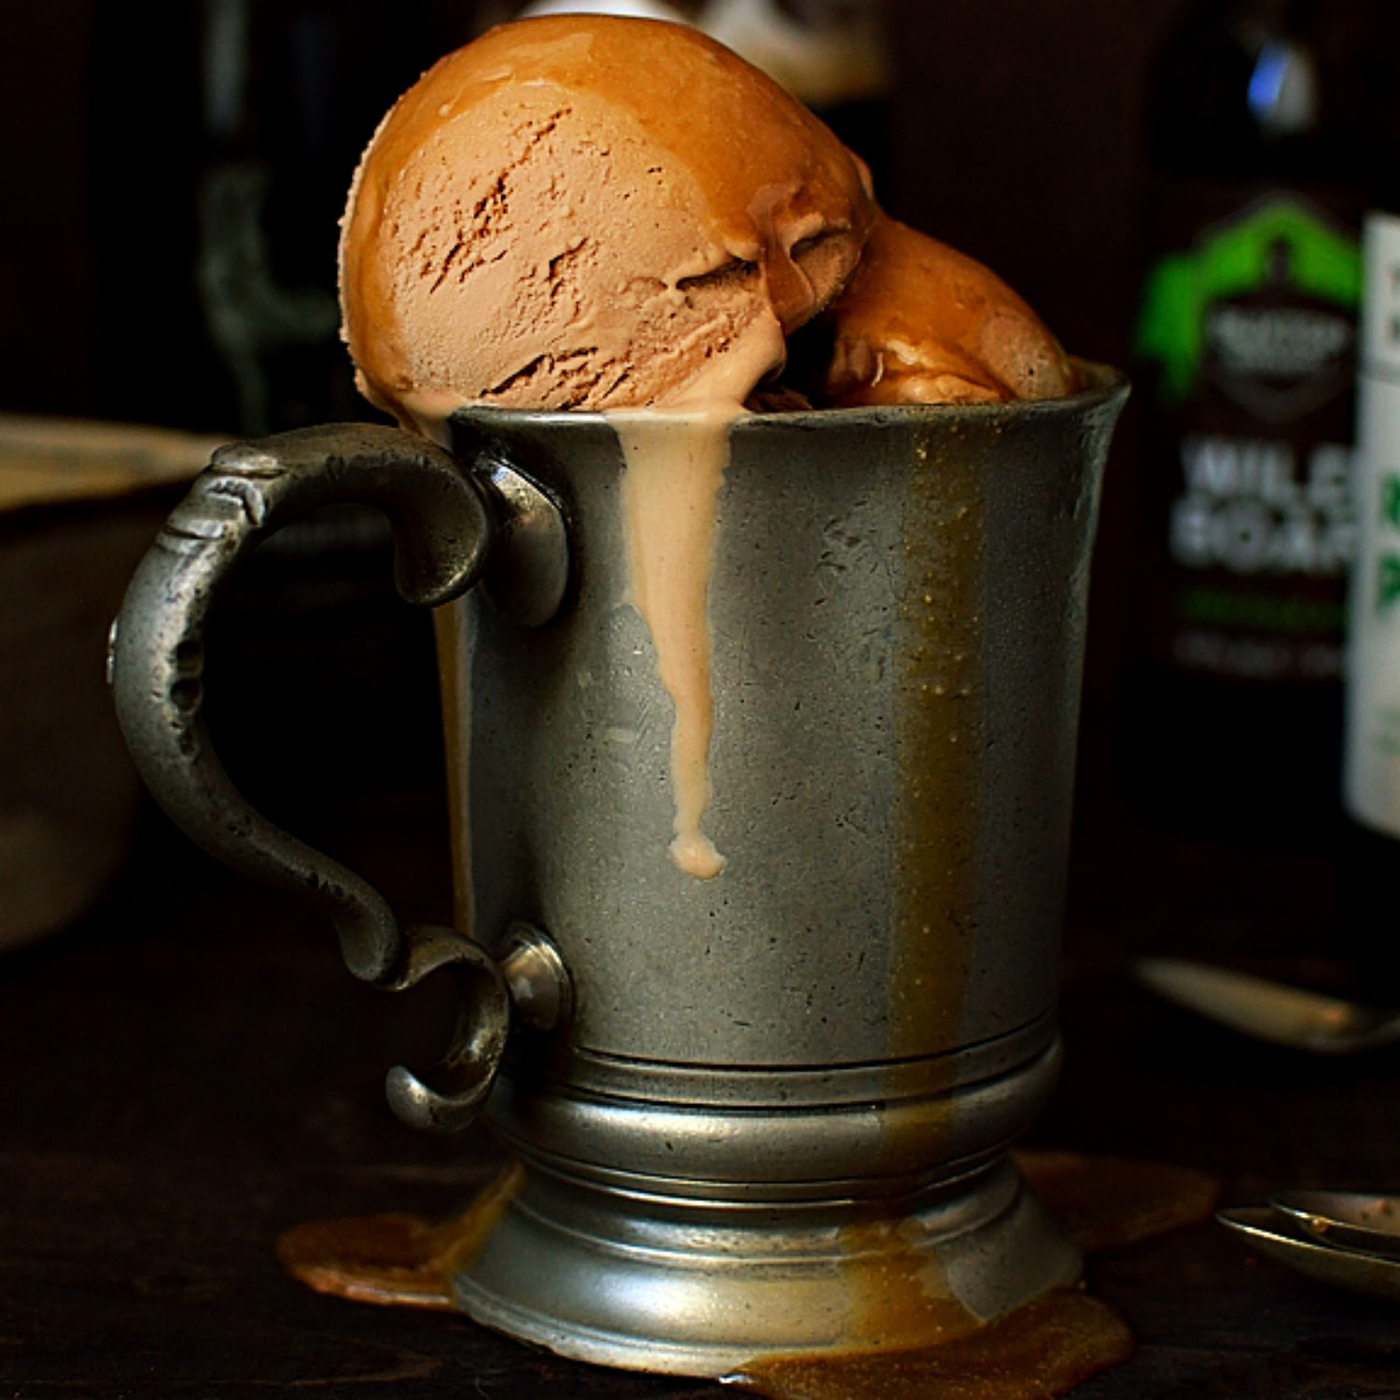 Beguile perfume (Stout beer, Chocolate, Vanilla Bean Ice Cream, Caramel, Toasted Coconut)